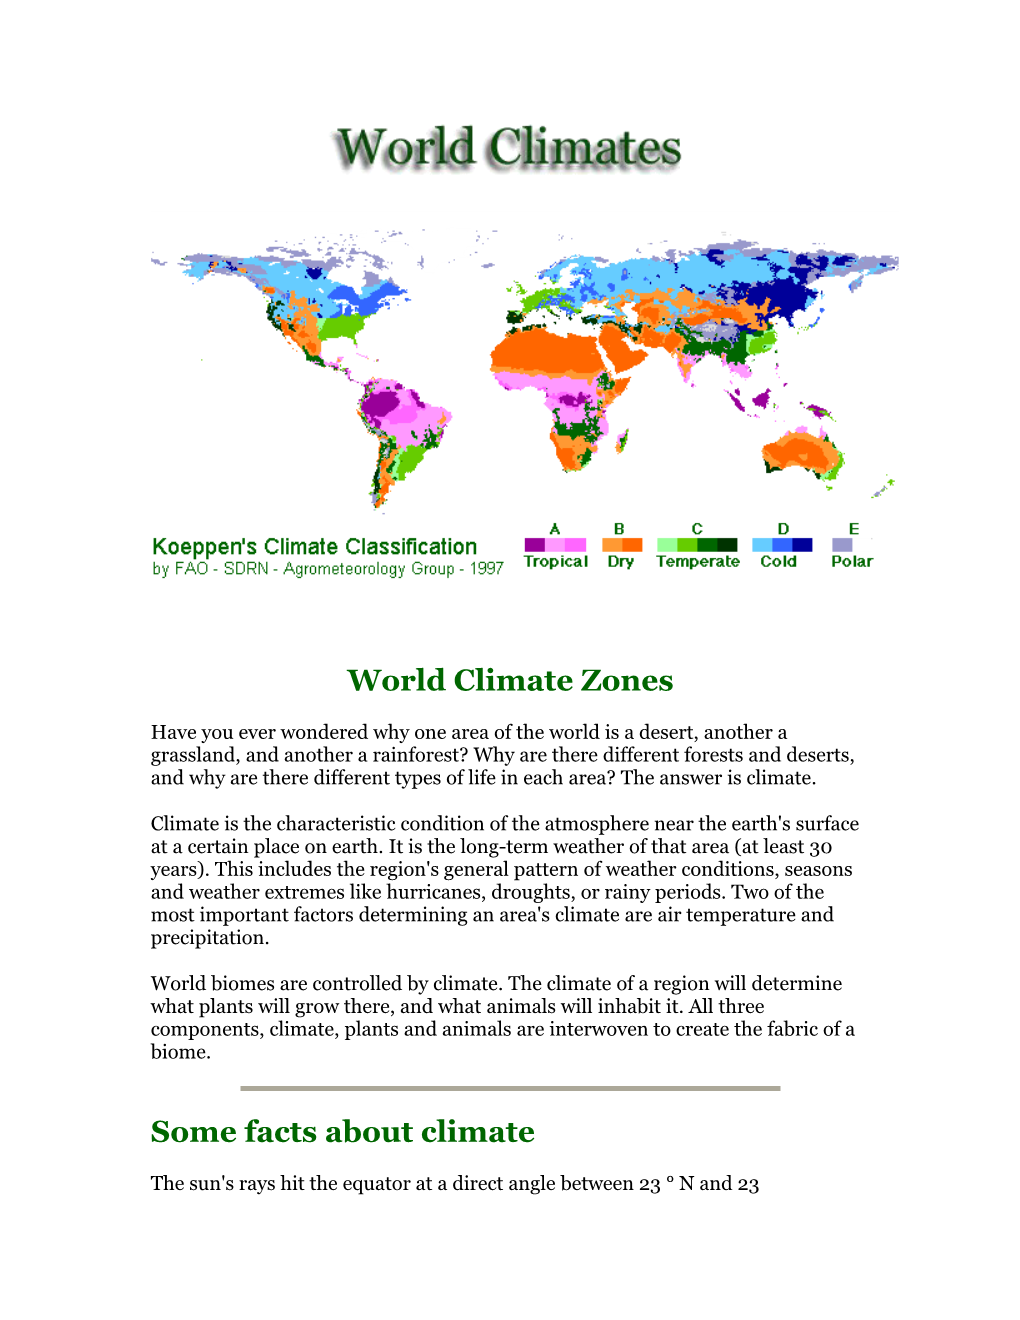 World Climate Zones